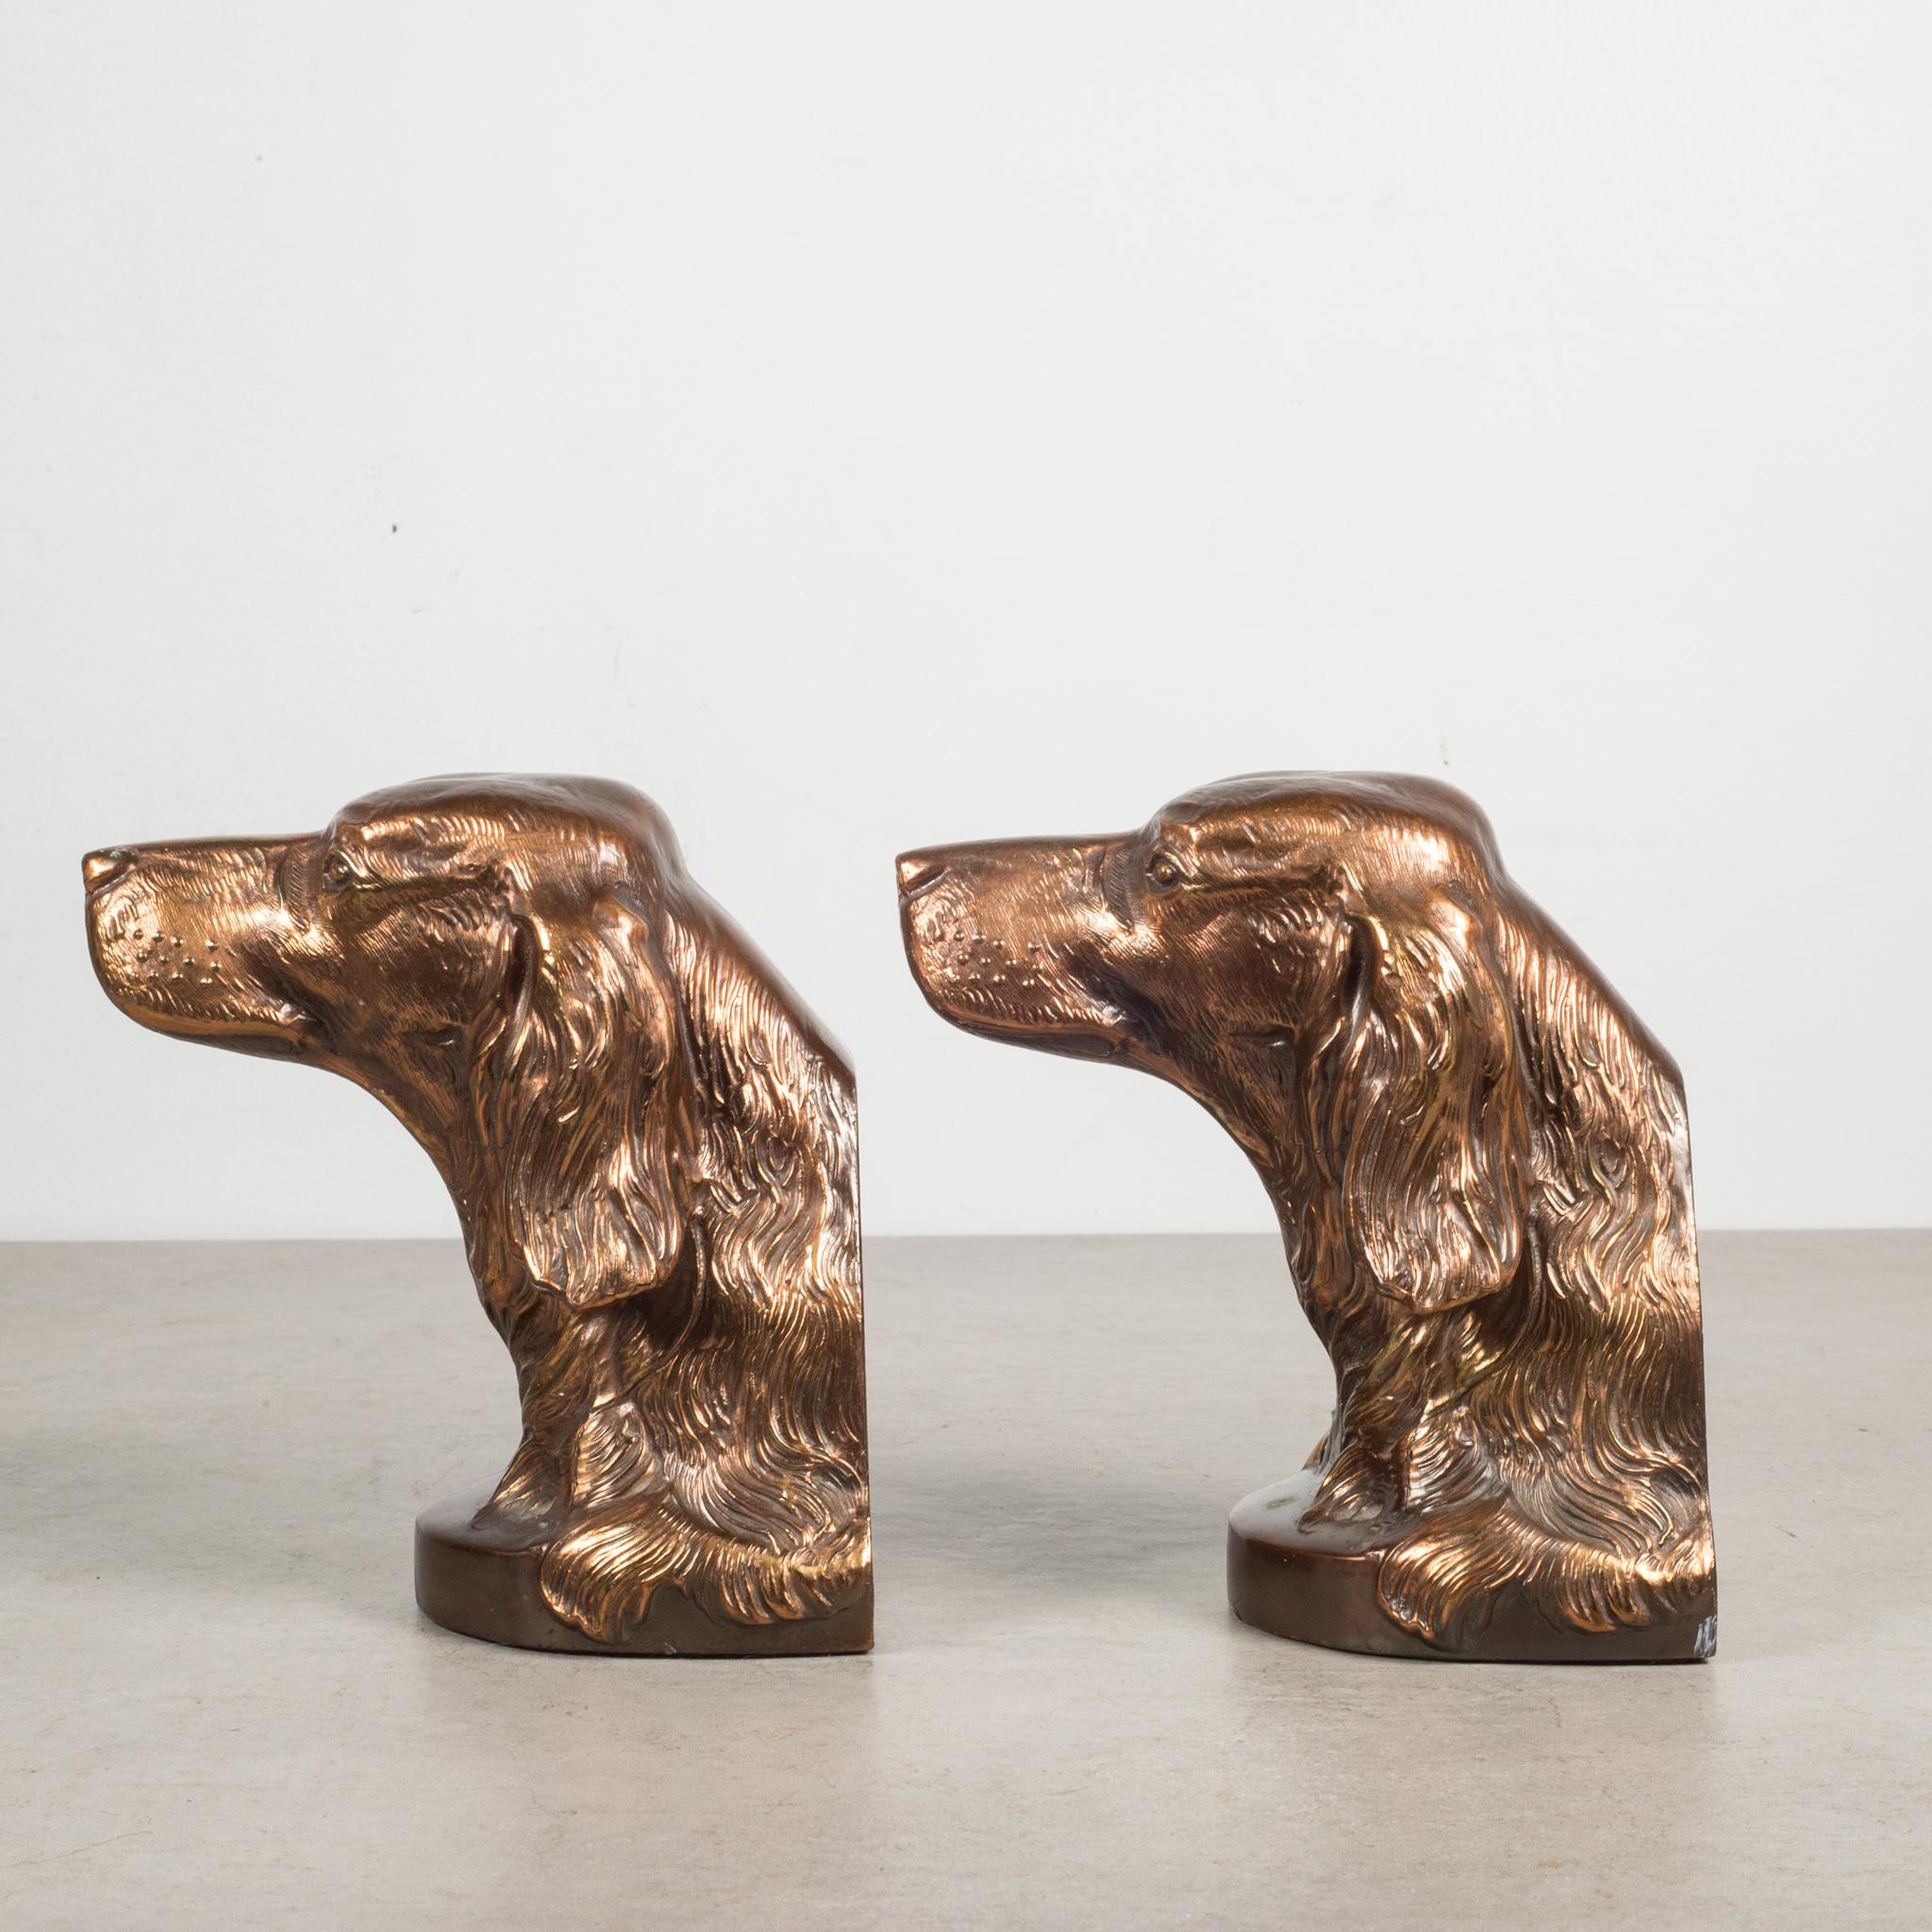 Industrial Bronze-Plated Dog Bookends, circa 1940